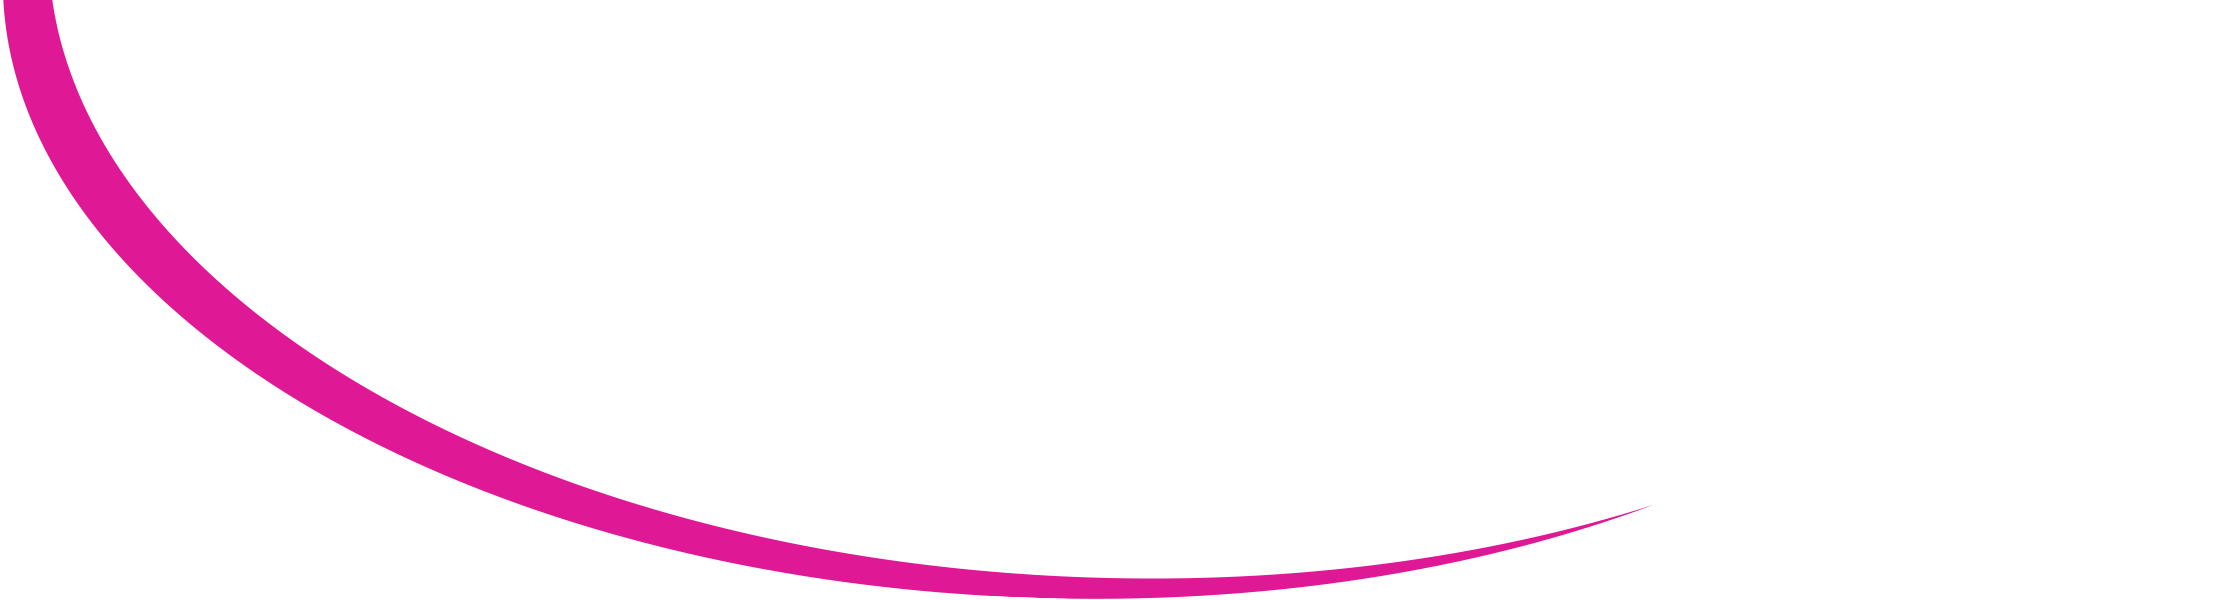 Pink Line Png